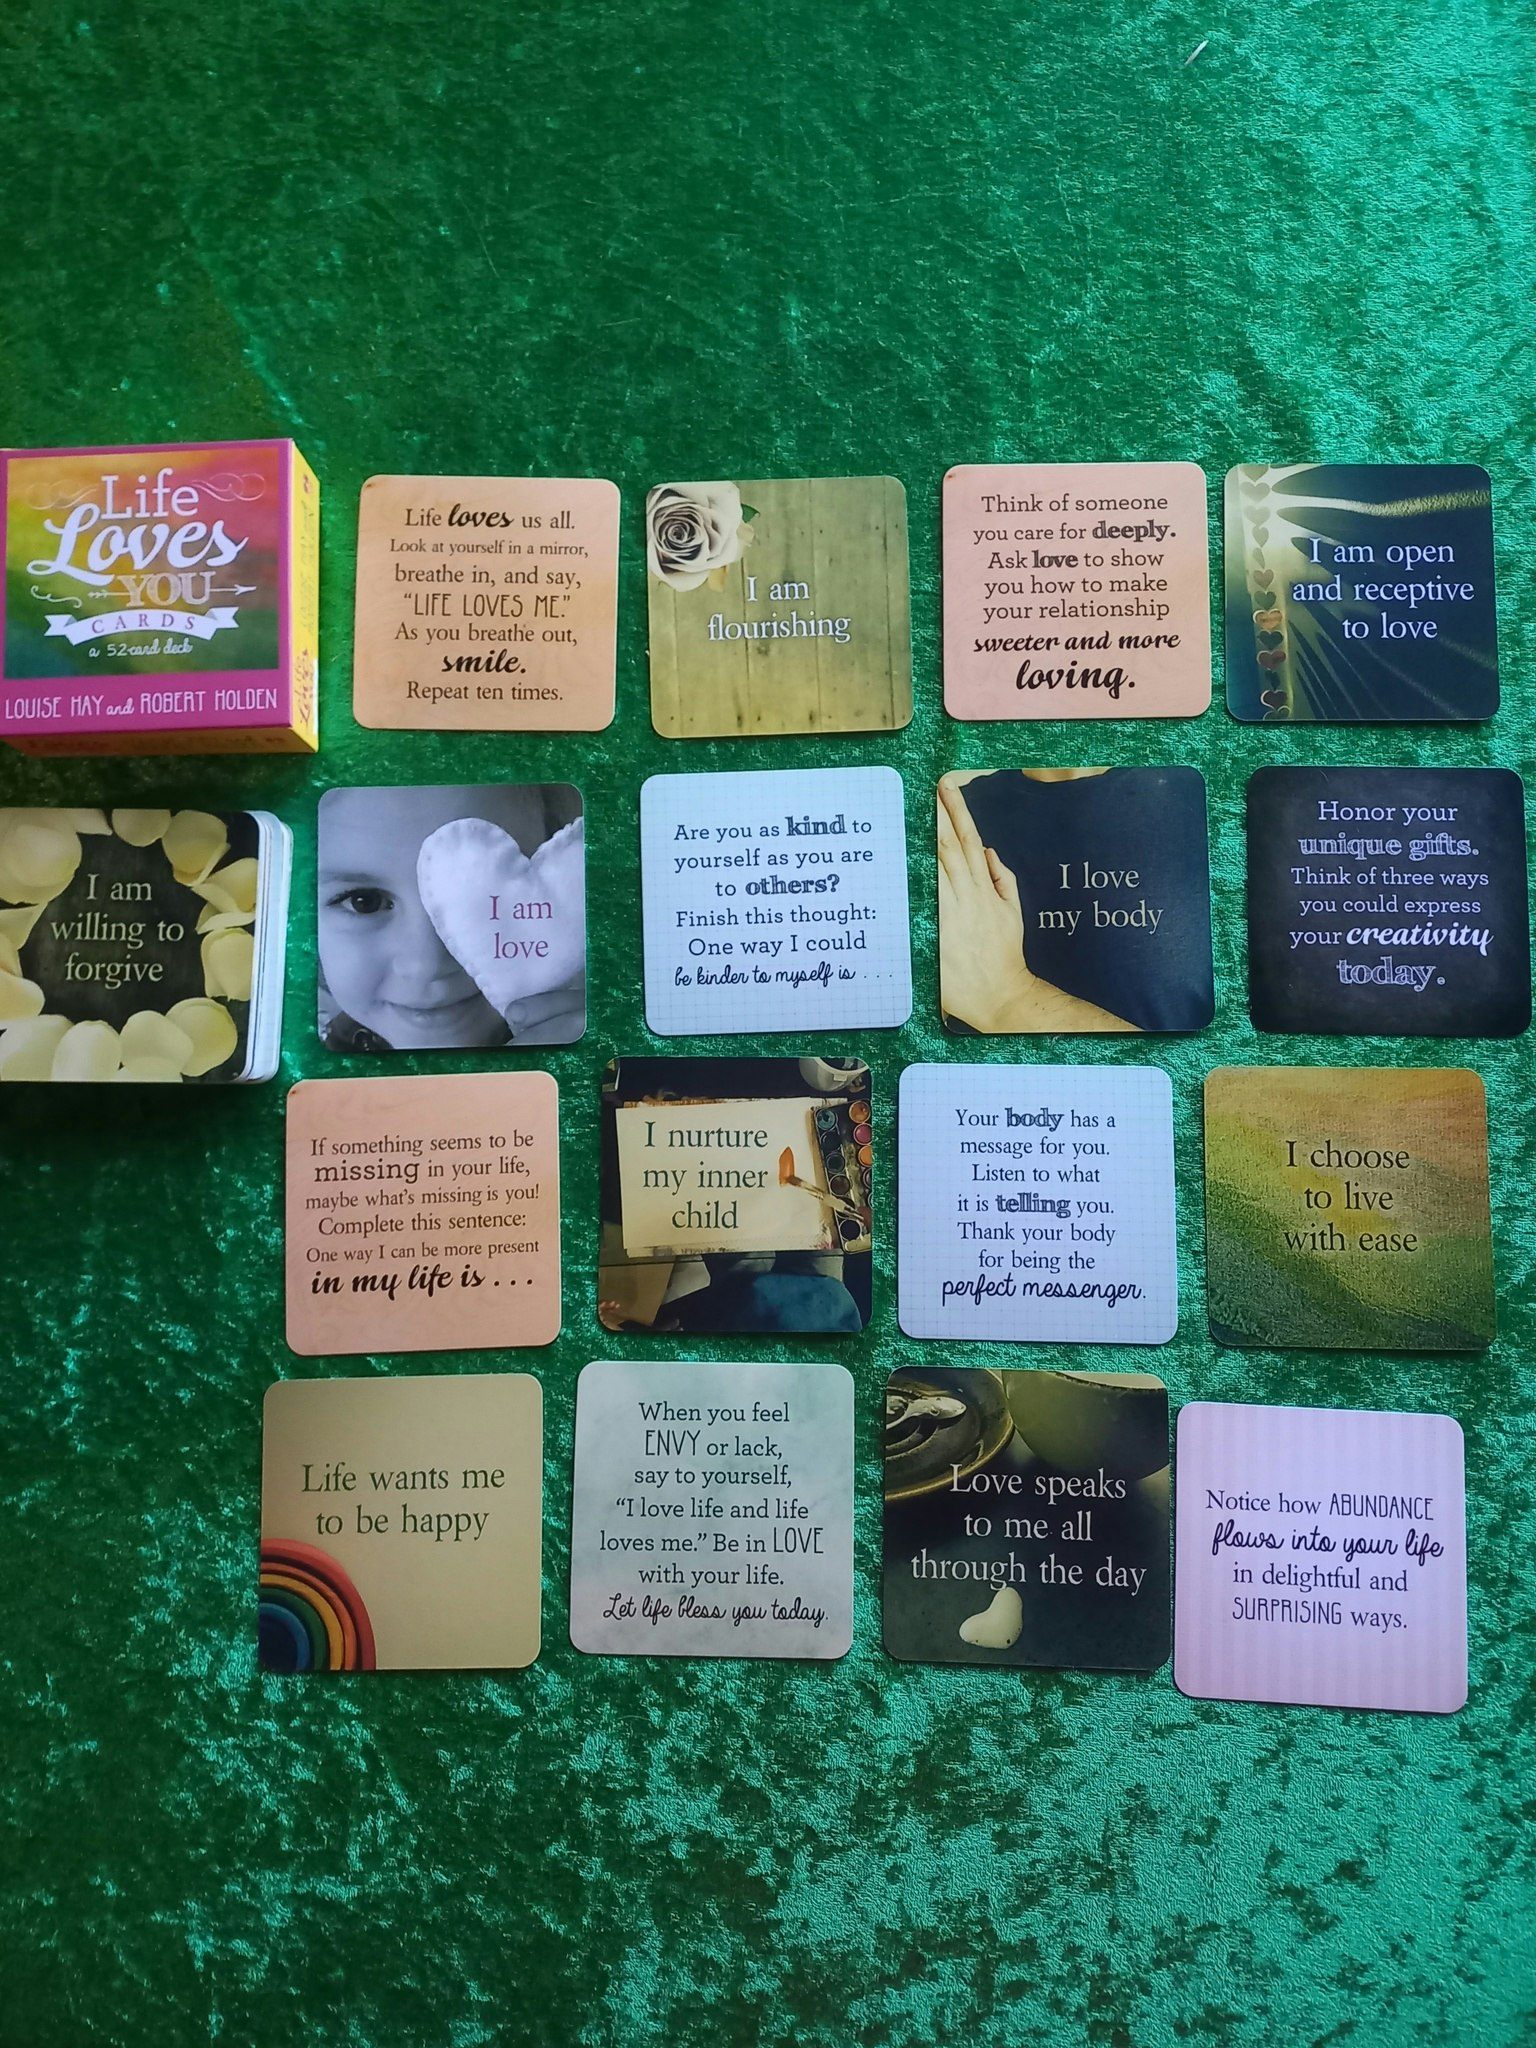 Life loves you card